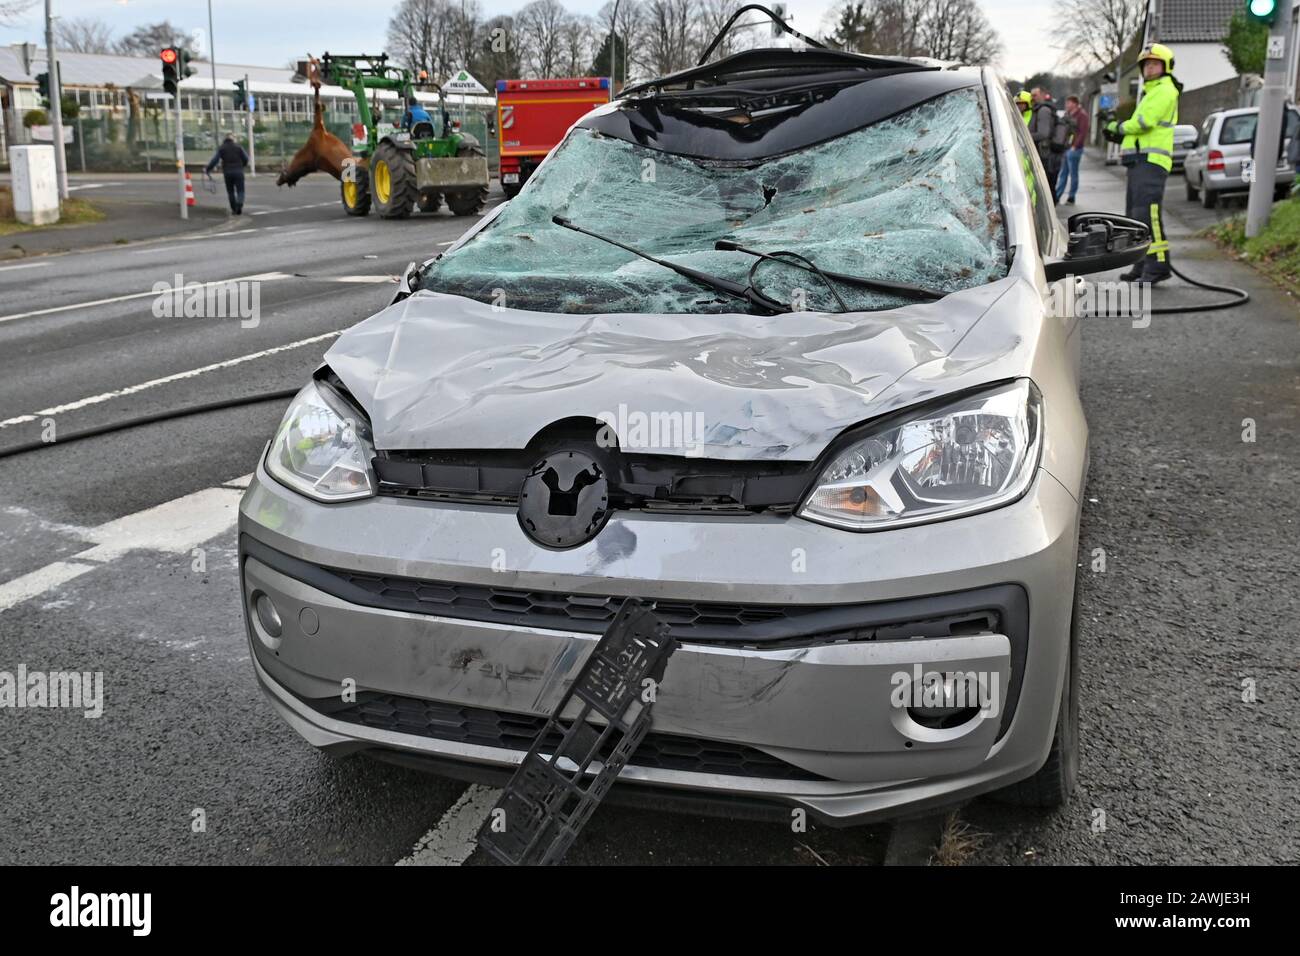 Marl, Germany. 09th Feb, 2020. A damaged car is on the road after a collision with a horse. In the background, the euthanized horse is being transported away with a tractor. A 56 year old driver was injured in a collision with a runaway horse on the federal highway 225 in Marl (Recklinghausen district). The horse had injured itself so badly that it had to be put down by a veterinarian on the spot. (to dpa: 'Car collides with horse - animal dead, driver injured') Credit: Guido Bludau/dpa/Alamy Live News Stock Photo